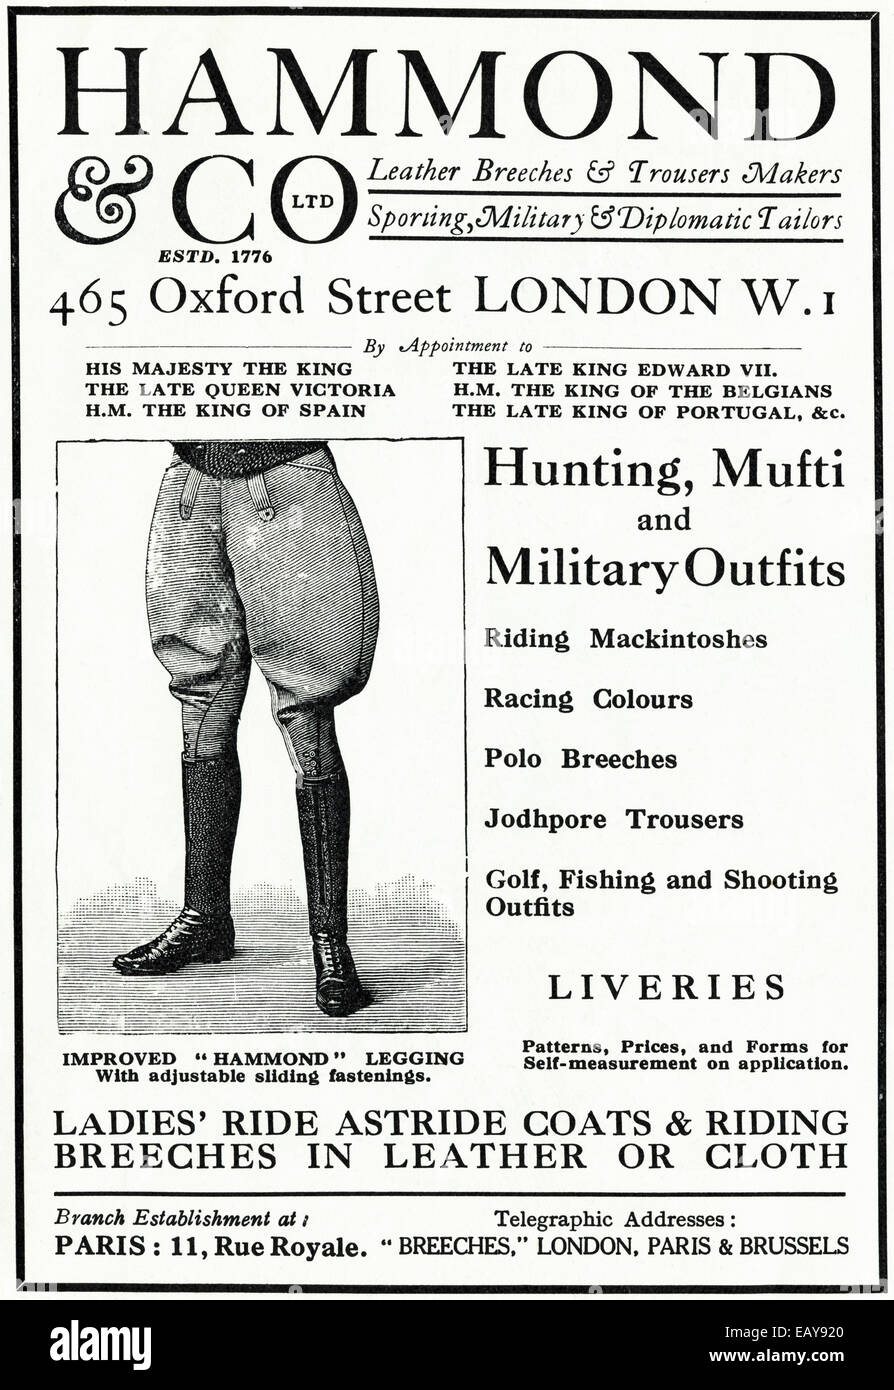 1920s advertisement for HAMMOND & CO leather breeches & trouser makers, sports, military and diplomatic tailors of London in Eng Stock Photo